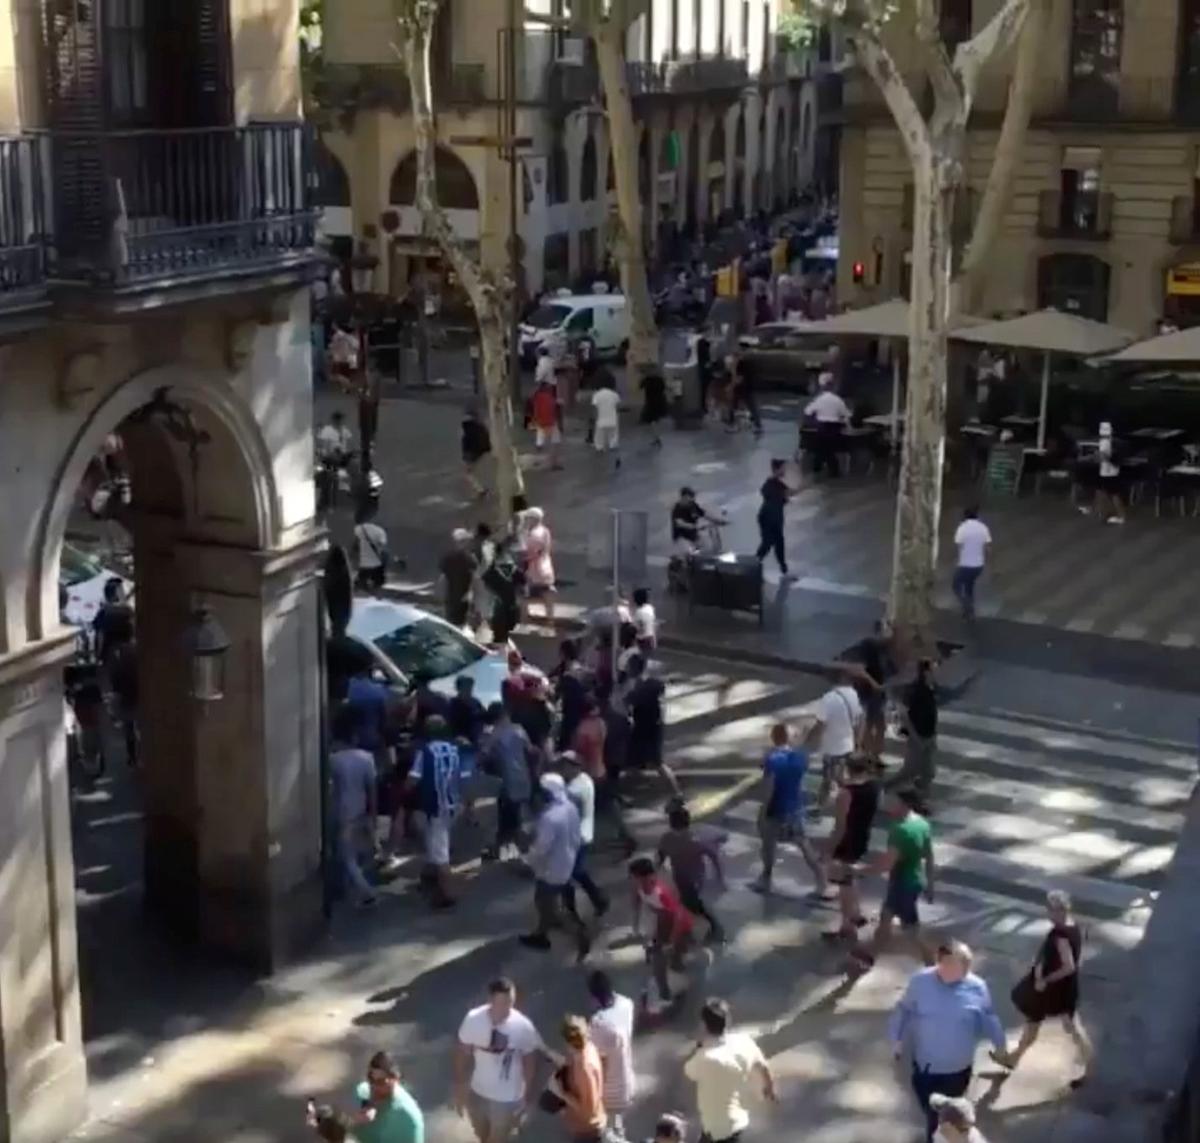 People move from the scene after a van crashed into pedestrians near the Las Ramblas avenue in central Barcelona, Spain August 17, 2017, in this still image from a video obtained from social media. (Courtesy of McKenzie Tavoda/via REUTERS)